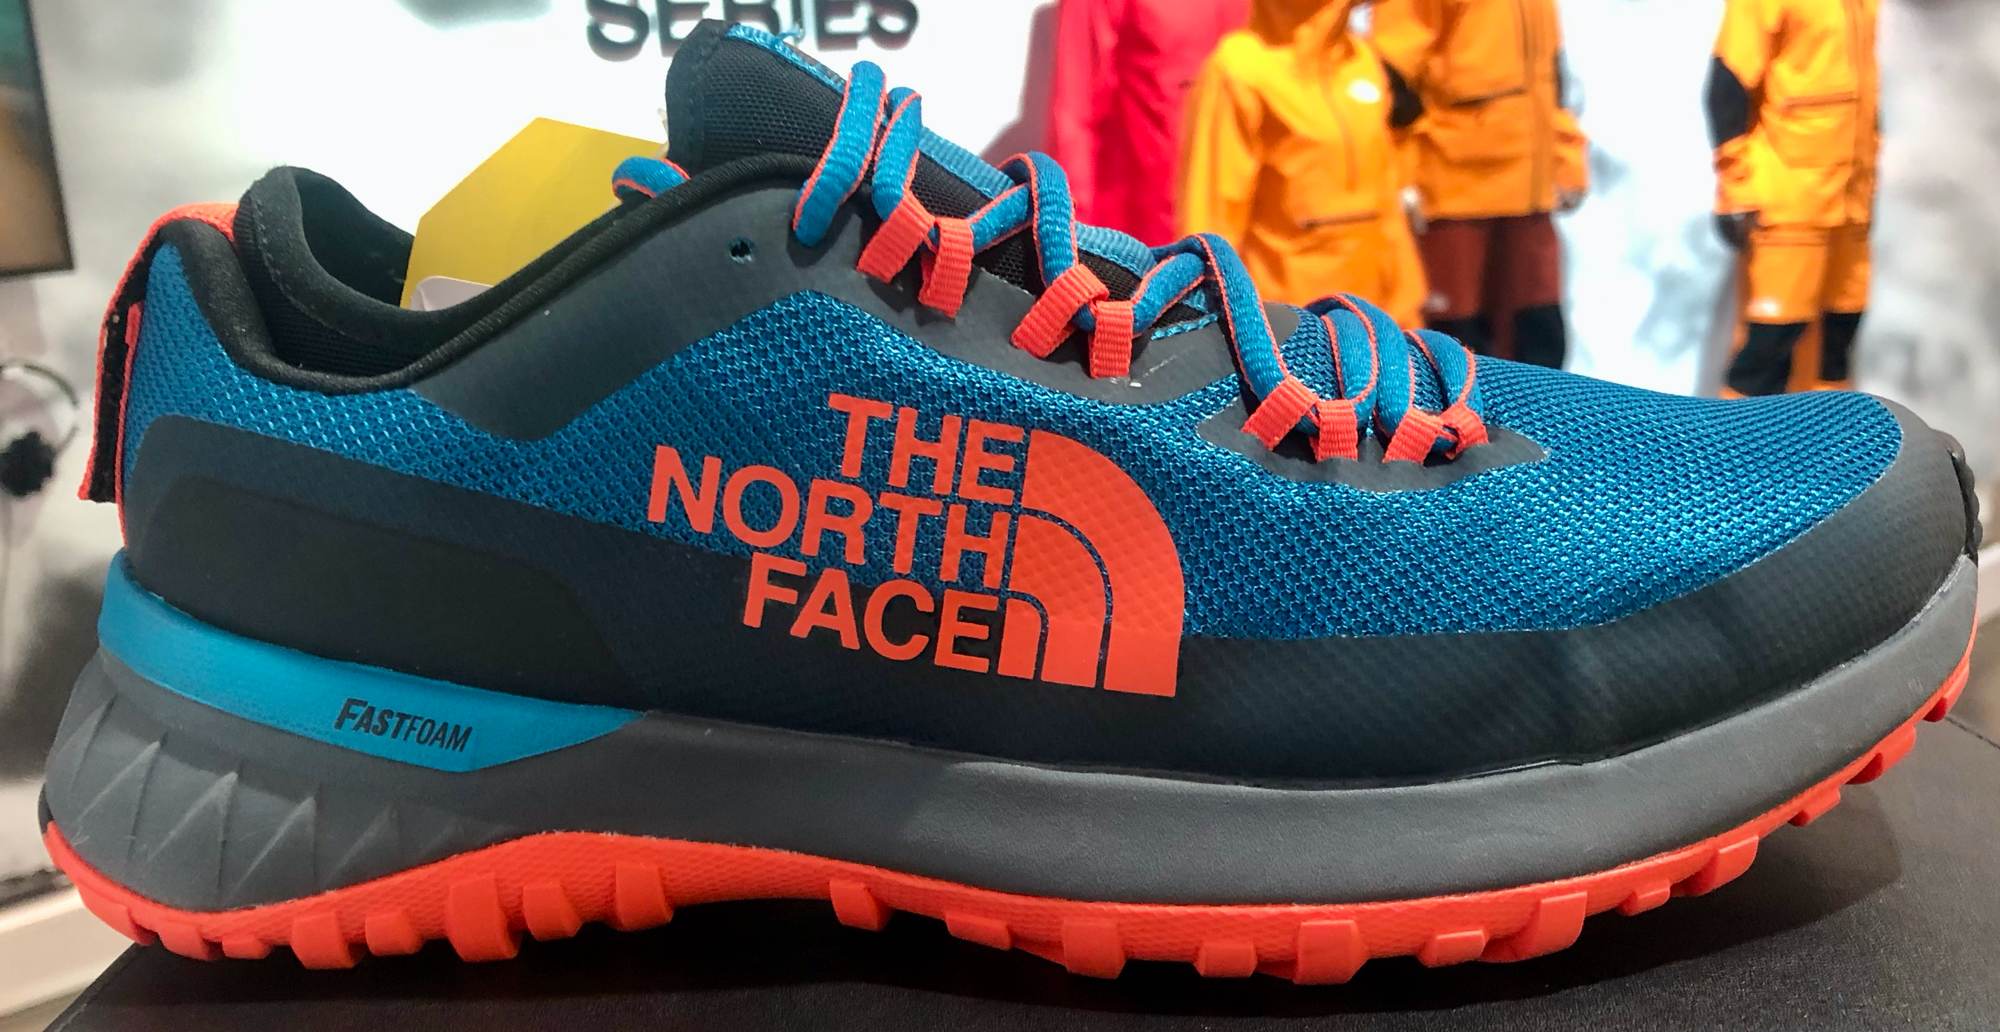 the north face ultra guide gtx